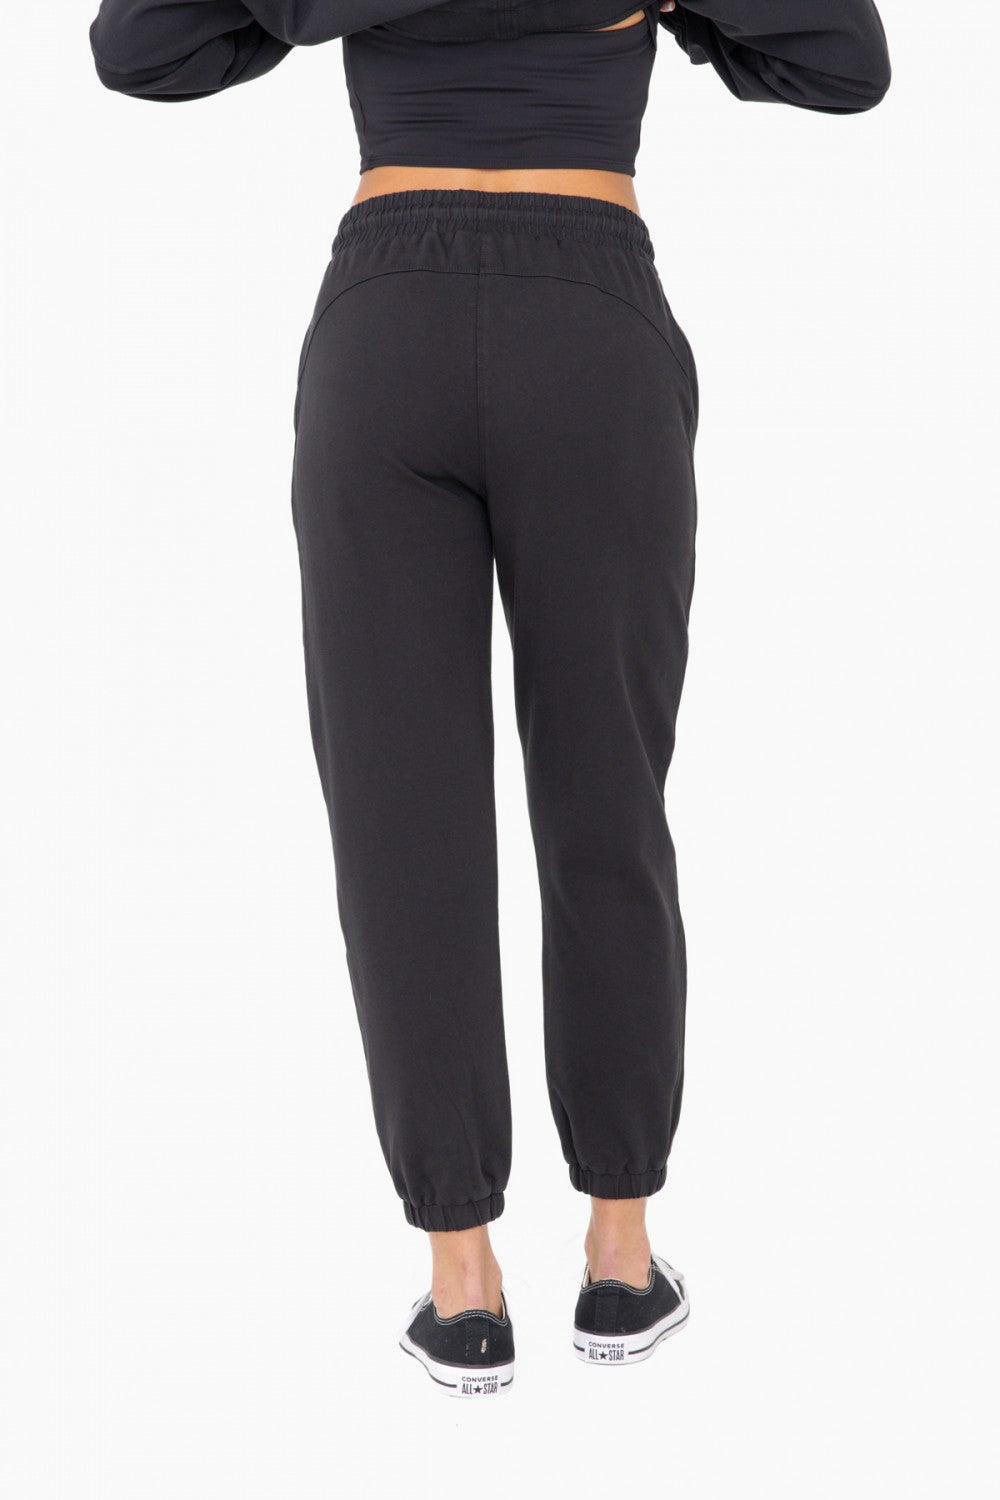 Swoop Back Twill Joggers - KP-A1109